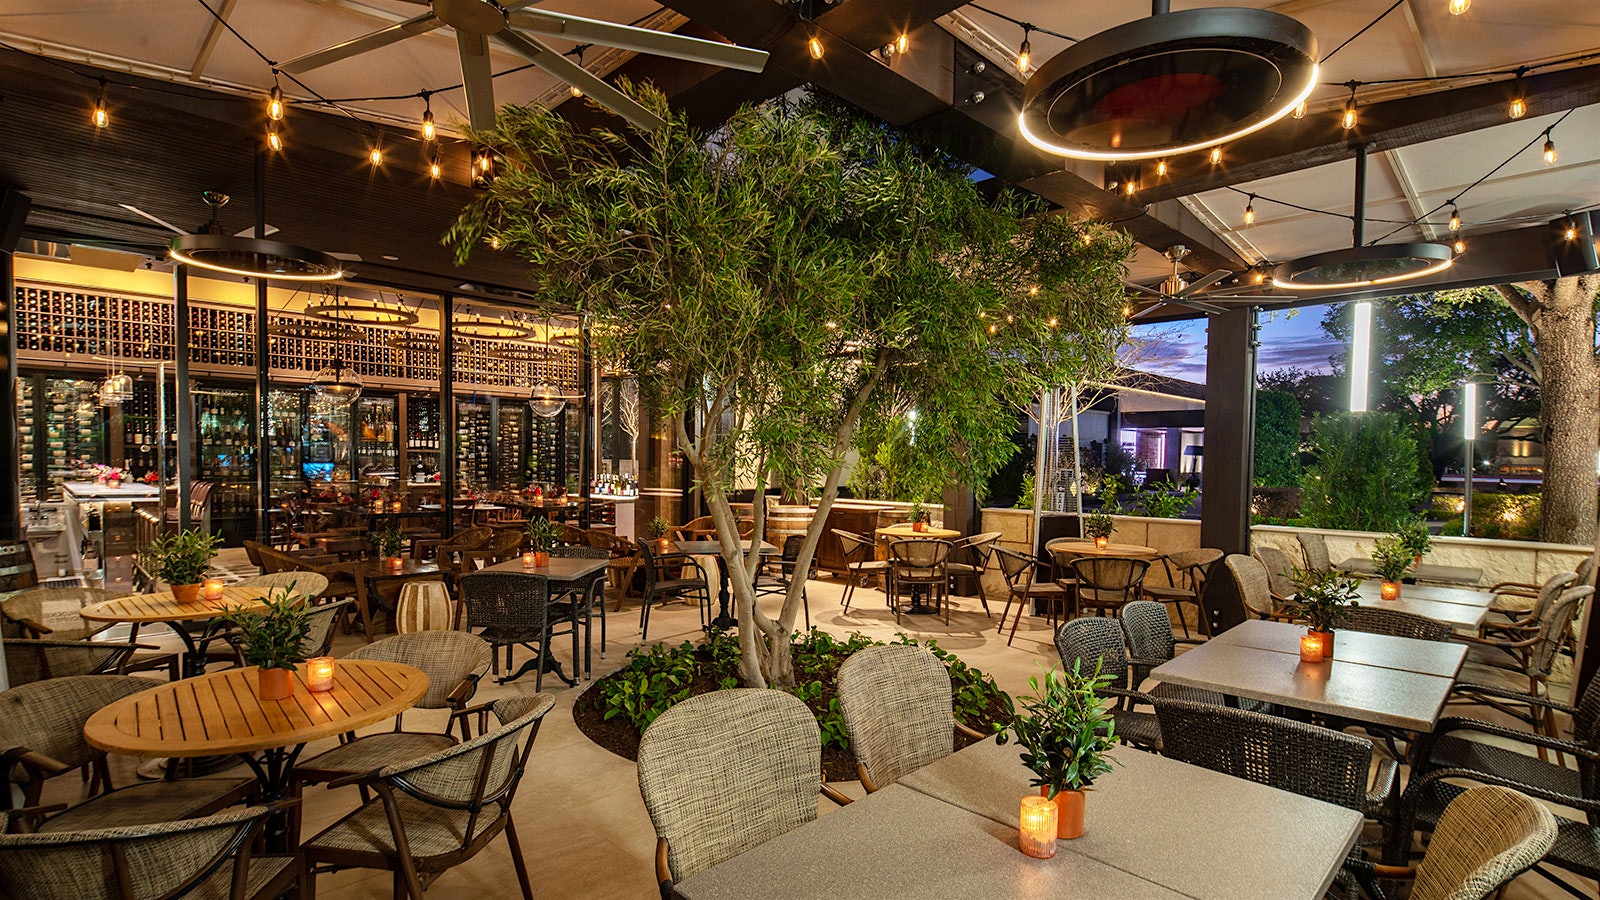     A view of the outdoor terrace overlooking the indoor space of Stella's Wine Bar 